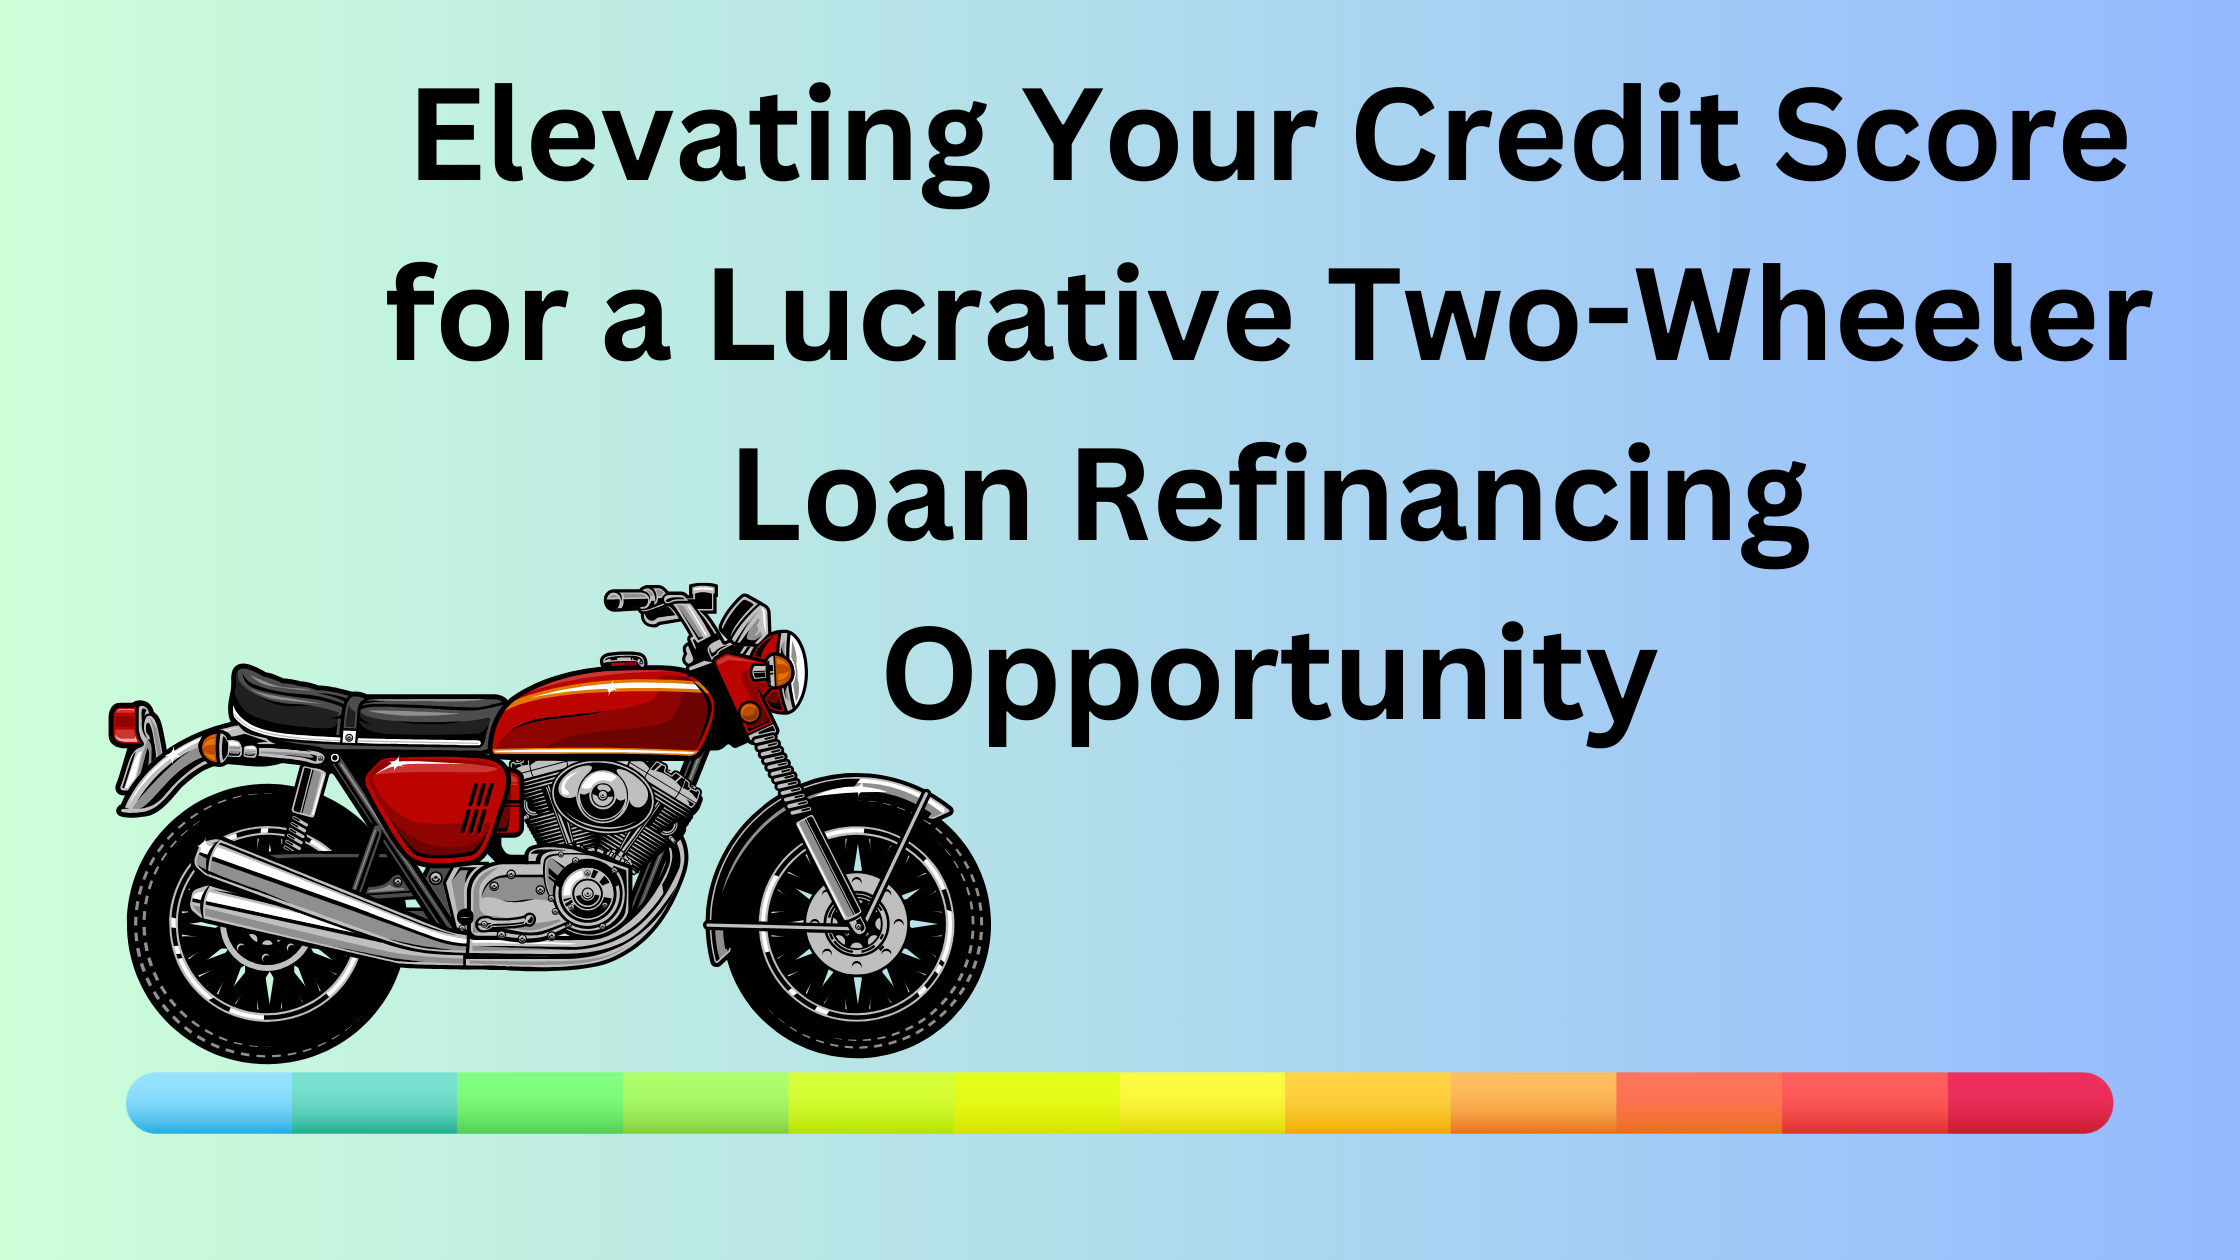 Elevating Your Credit Score for a Lucrative Two-Wheeler Loan Refinancing Opportunity